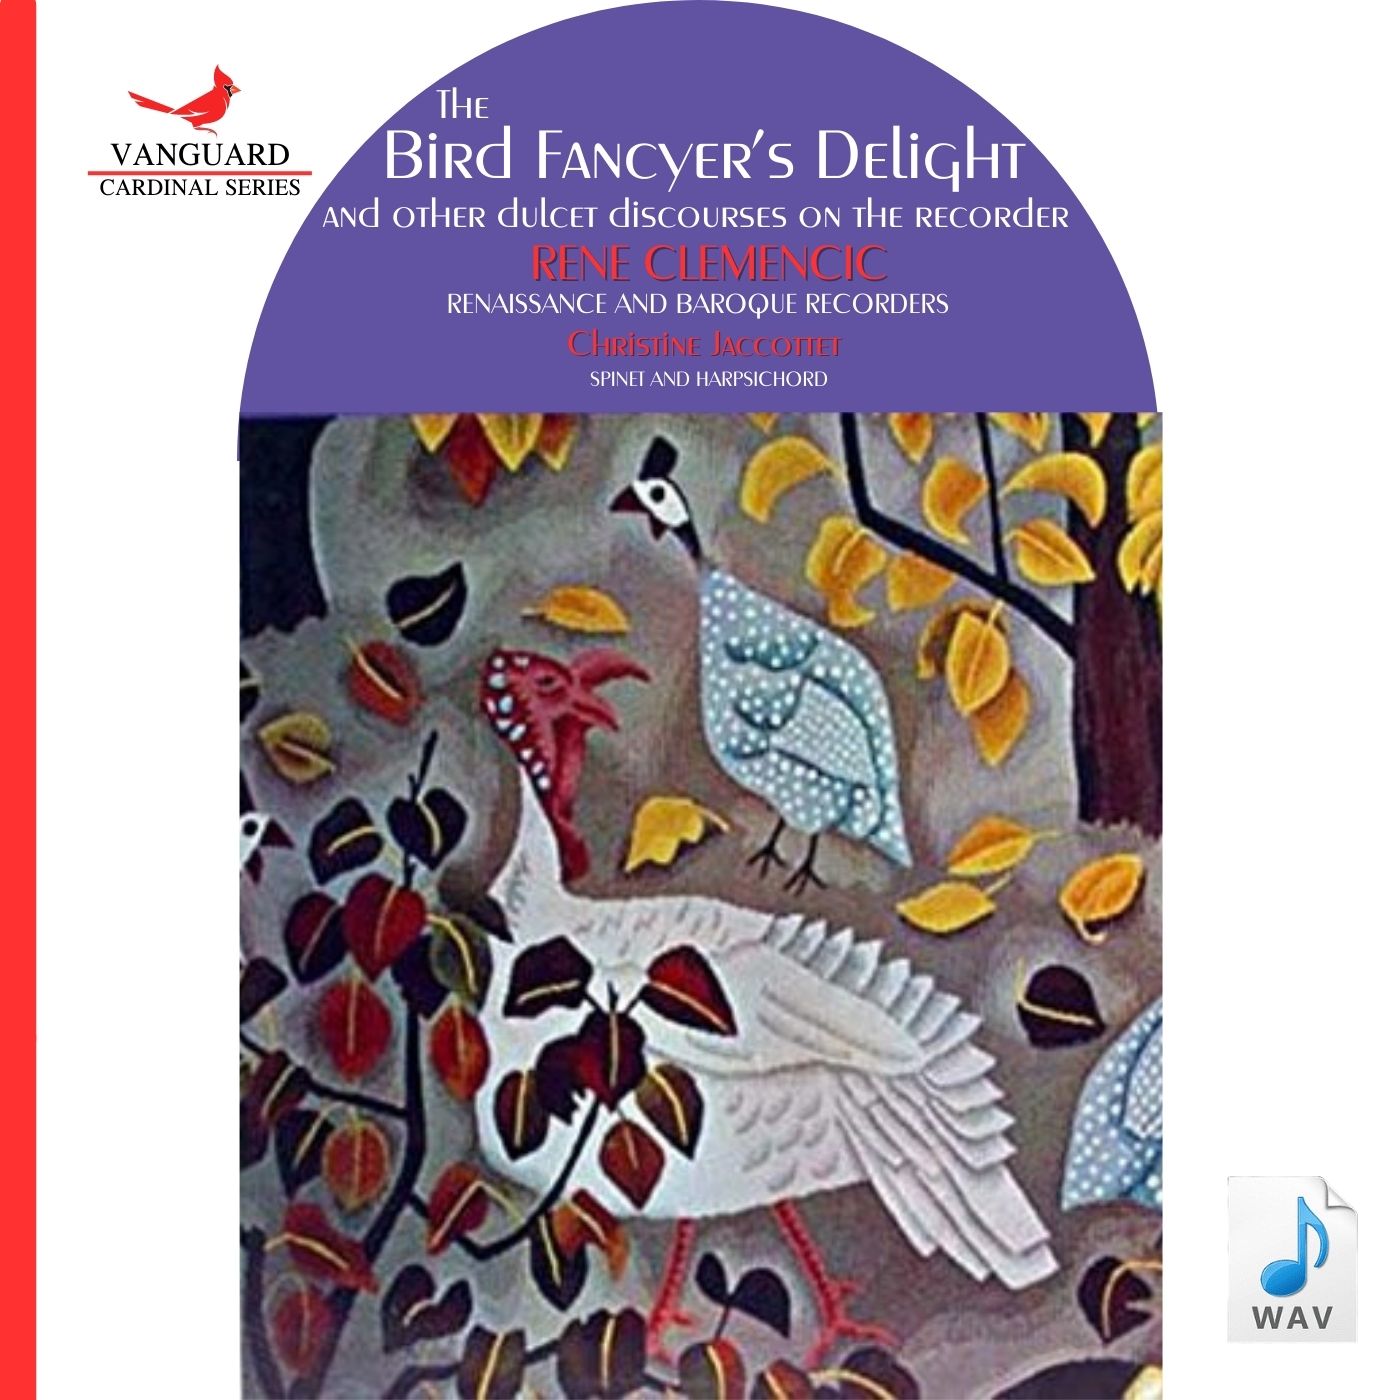 THE BIRD FANCYER'S DELIGHT and other dulcet discourses on the recorder - Rene Clemencic with Christine Jacottet (DIGITAL DOWNLOAD)